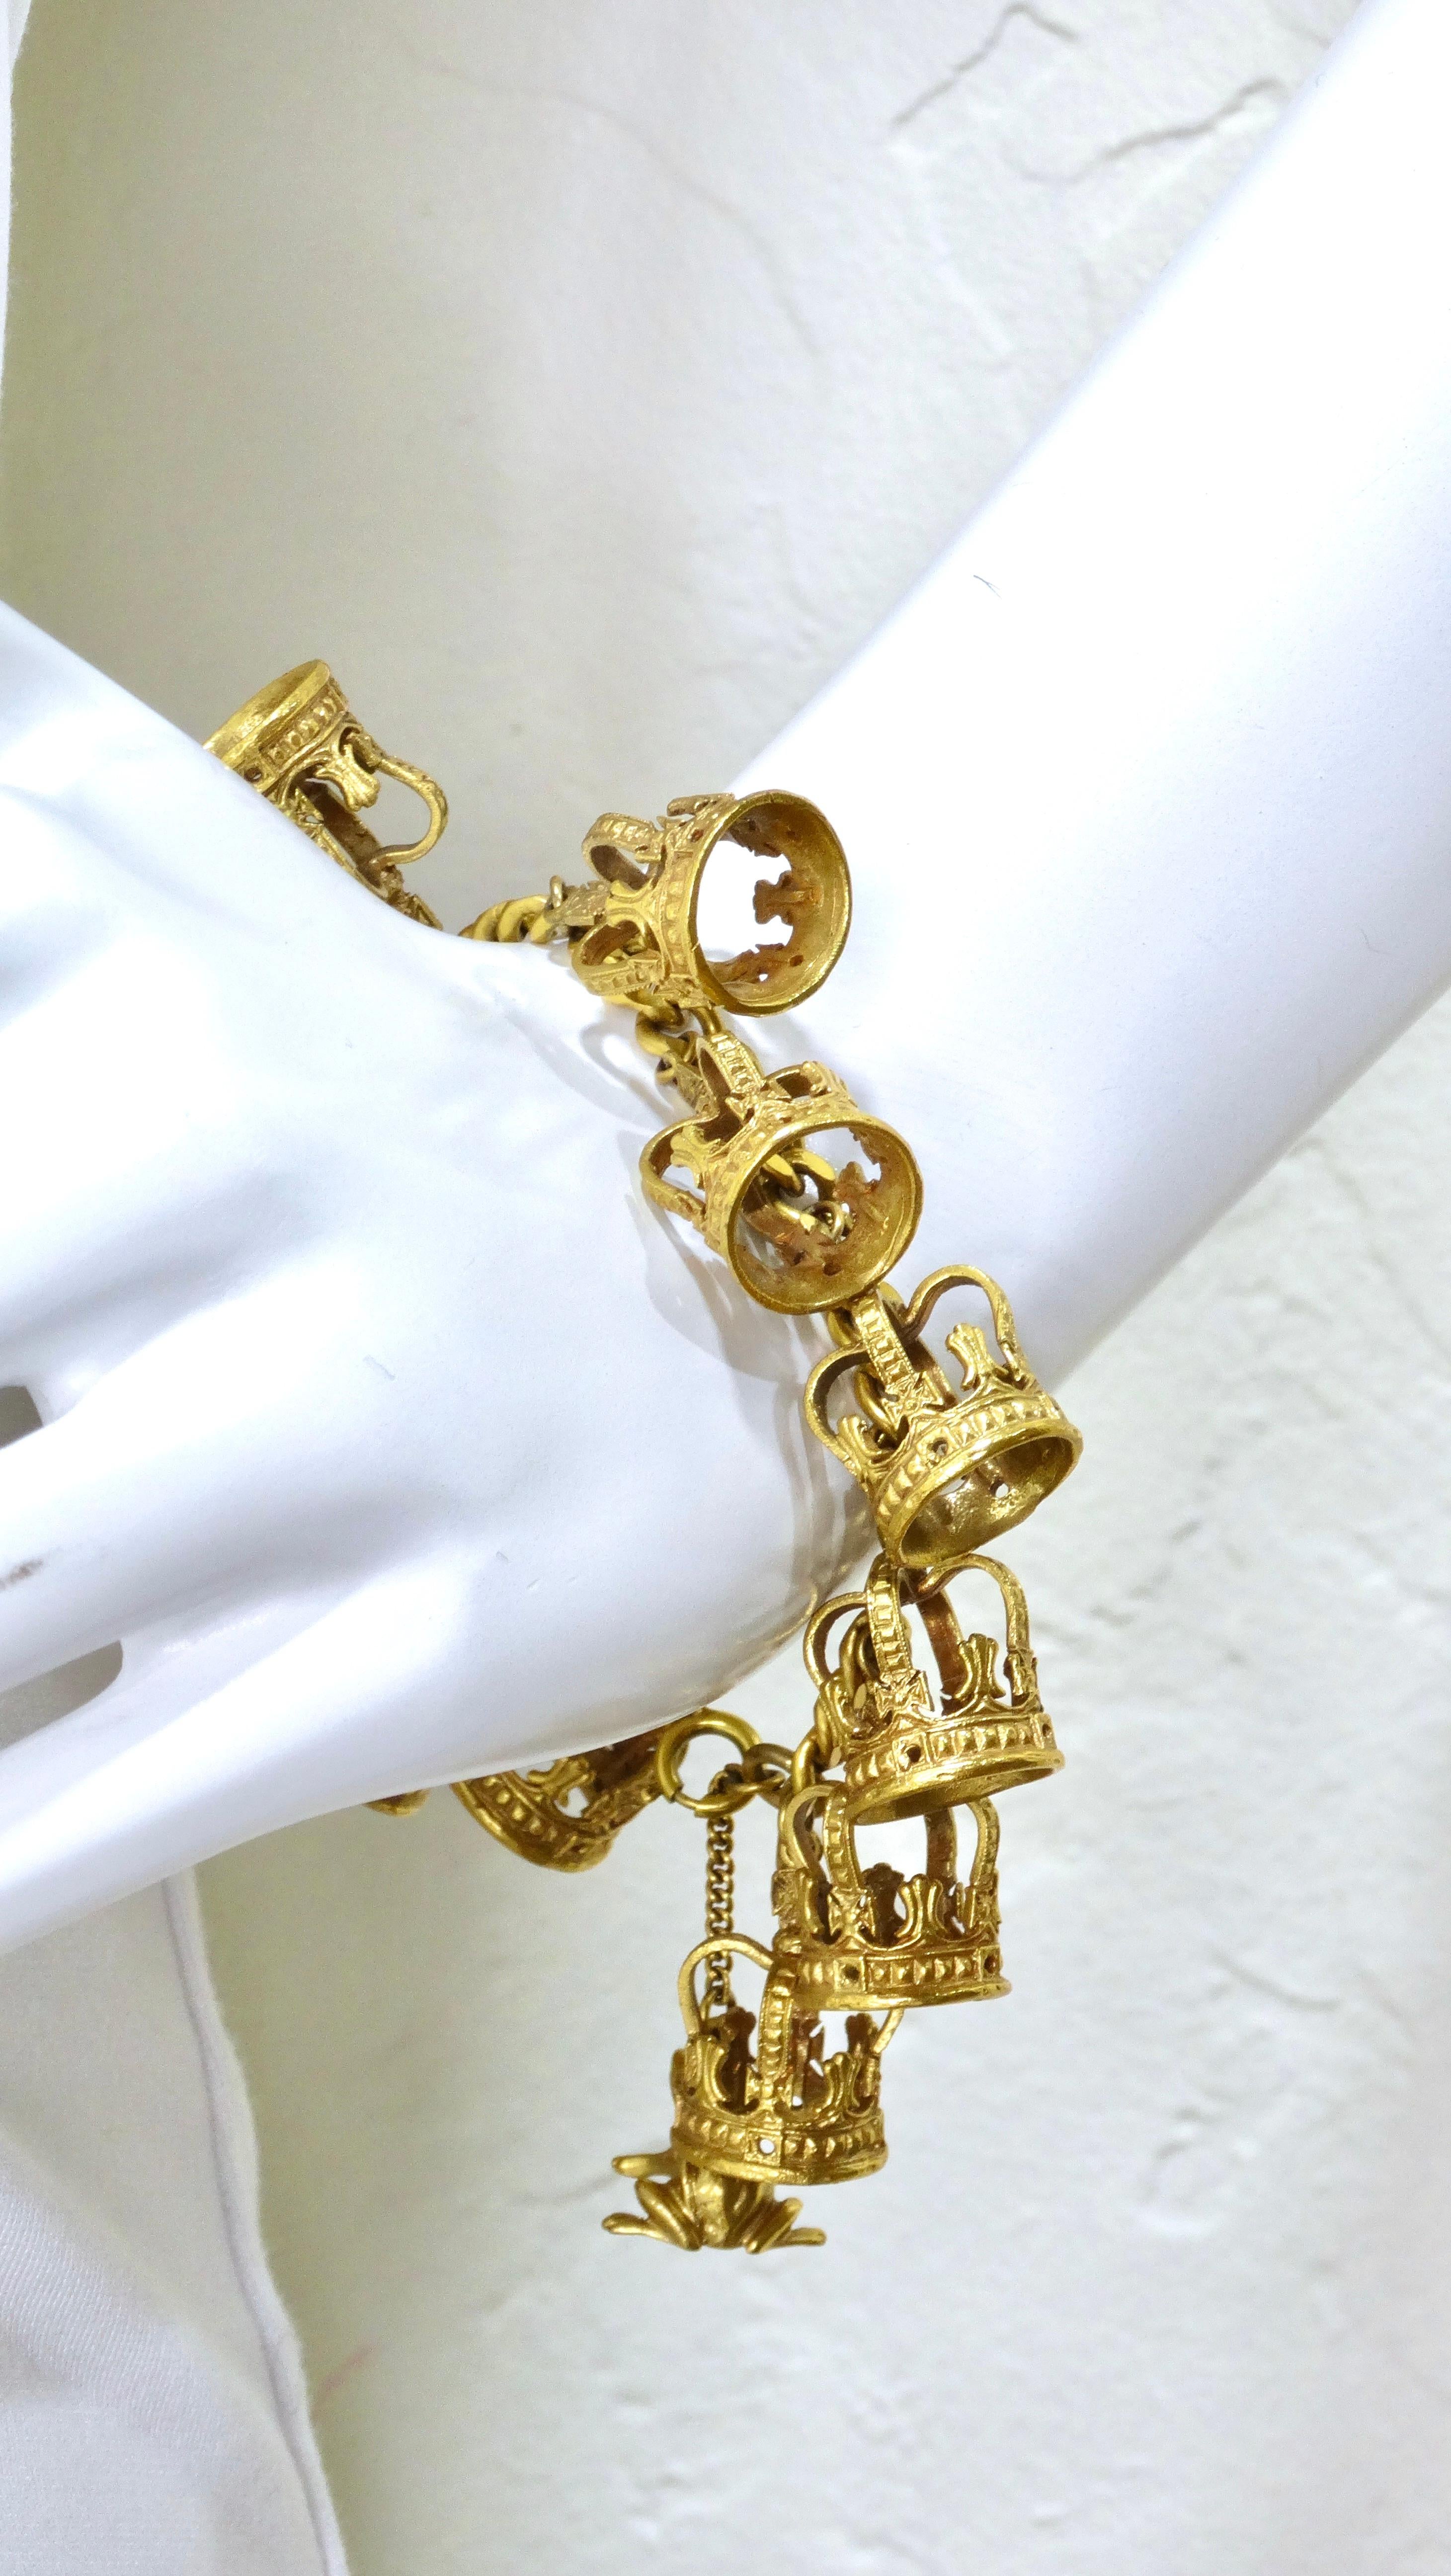 Pick up this vintage gem today! This is a vibrant gold tone charm style bracelet adorned with 11 gold crowns and one frog. This bracelet plays on the theme of kissing a frog to find your prince! This bracelet is eight inches in length. Each crown is